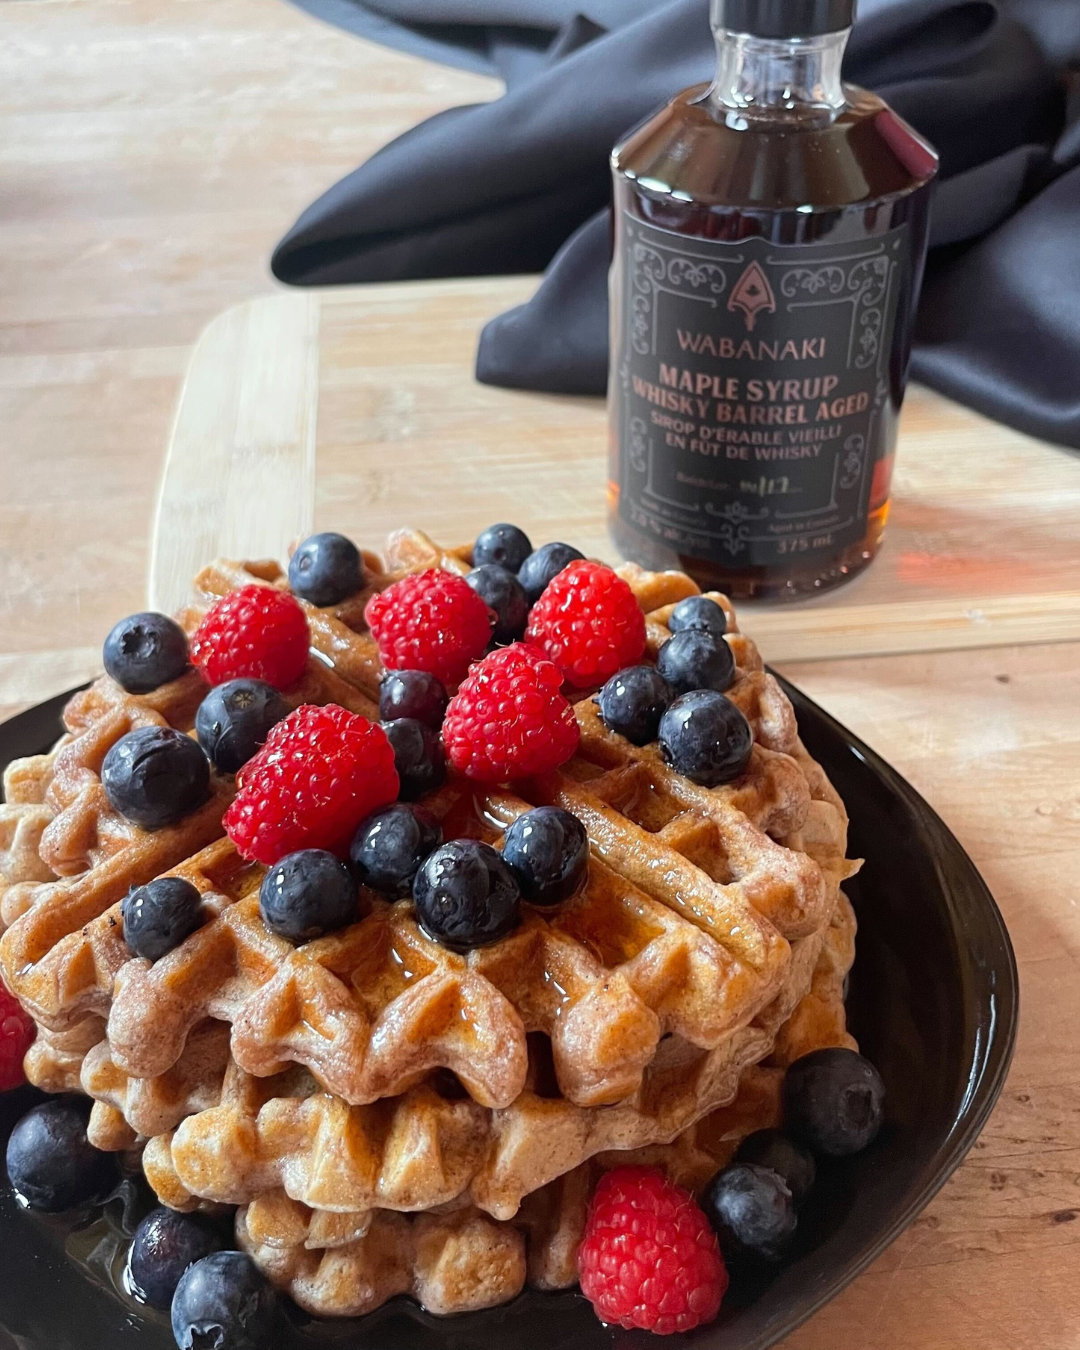 Belgian waffles topped with raspberries, blueberries and Wabanaki Maple Whisky Barrel aged Maple Syrup